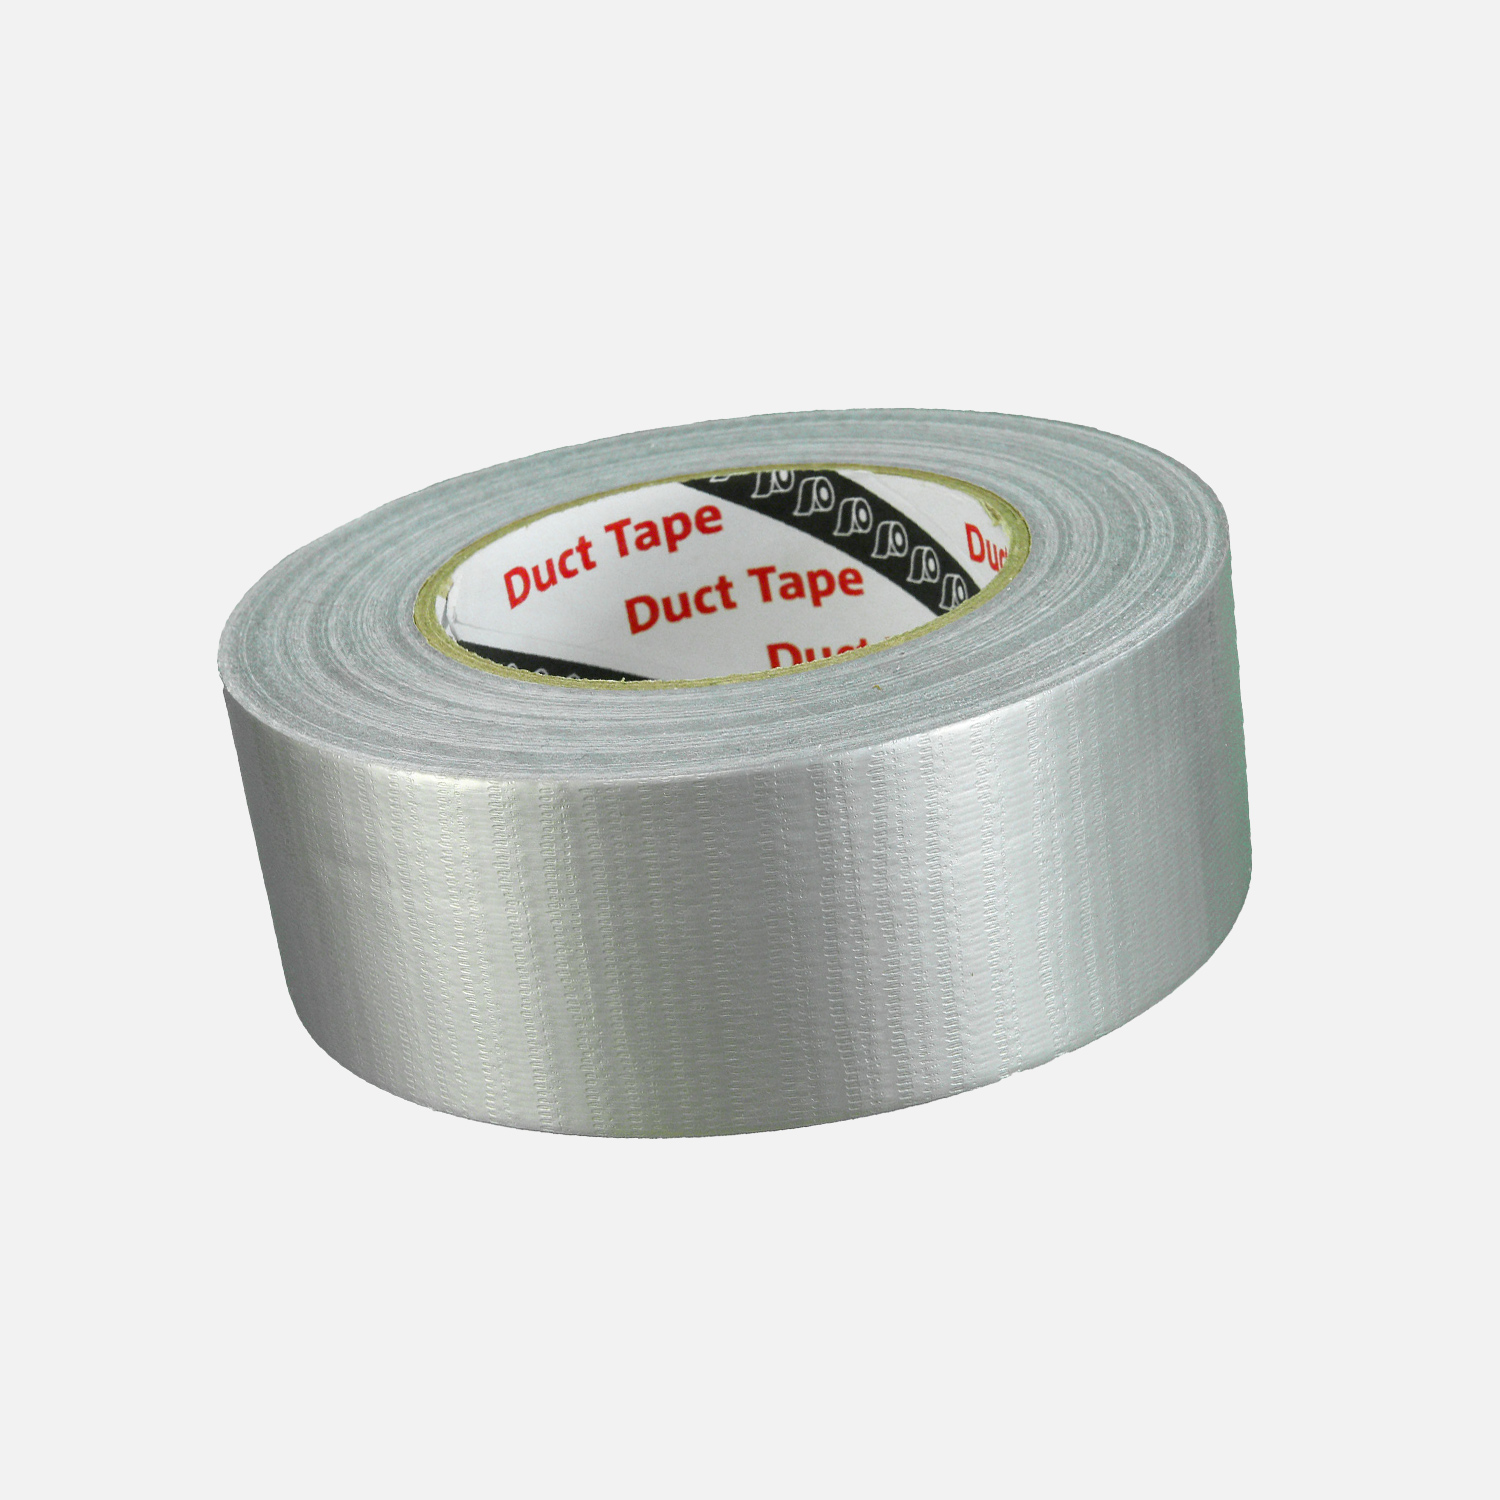 50m Rolle Panzerband / Duct Tape / Gaffa Tape - 48 mm breit - silber